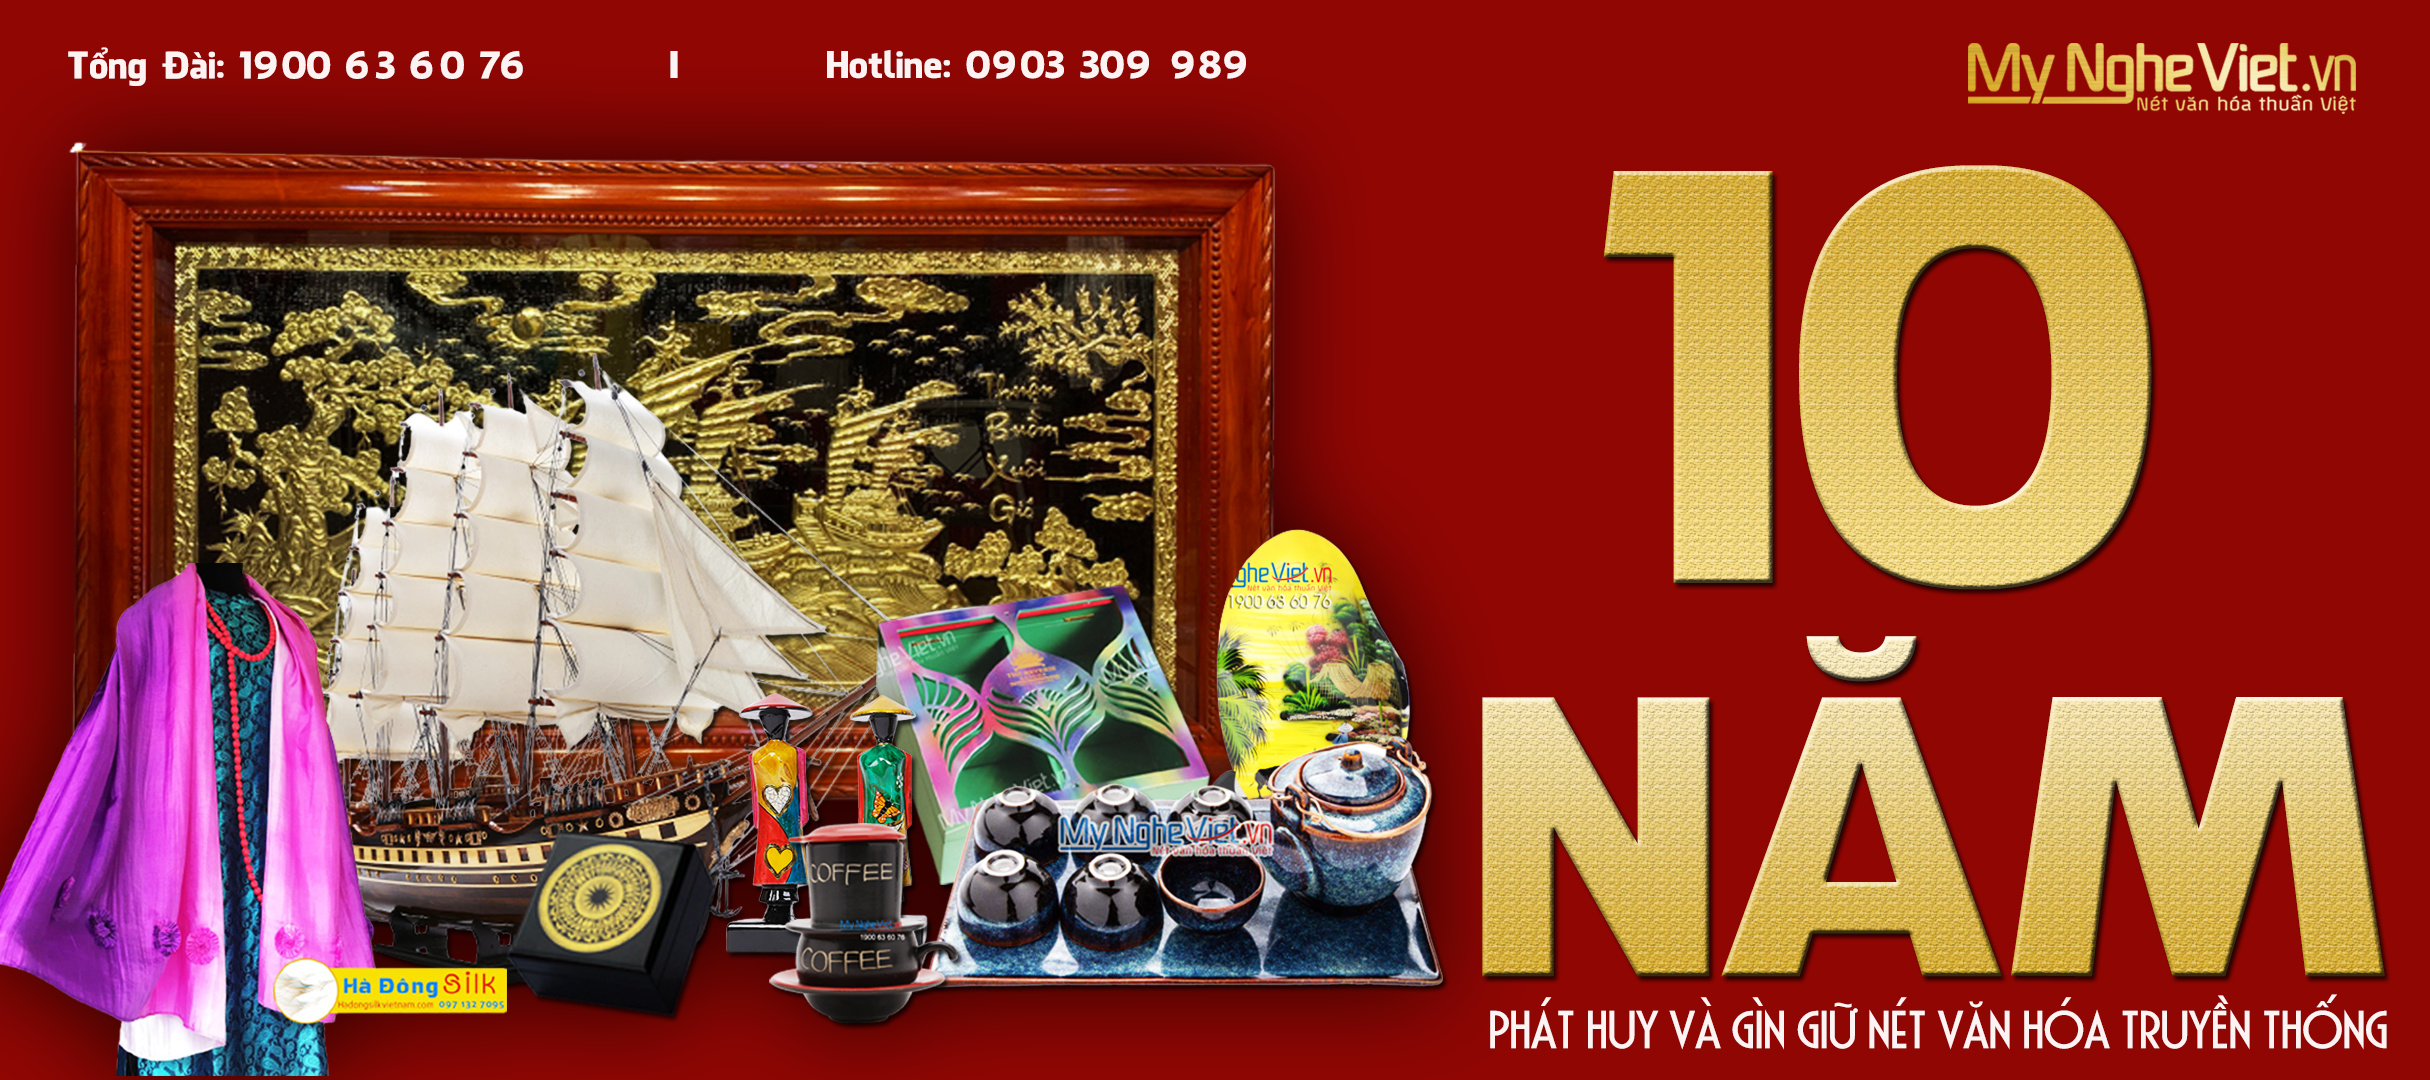 https://myngheviet.vn/www/uploads/images/banner-chinh-sinh-nhat-10-nam.png